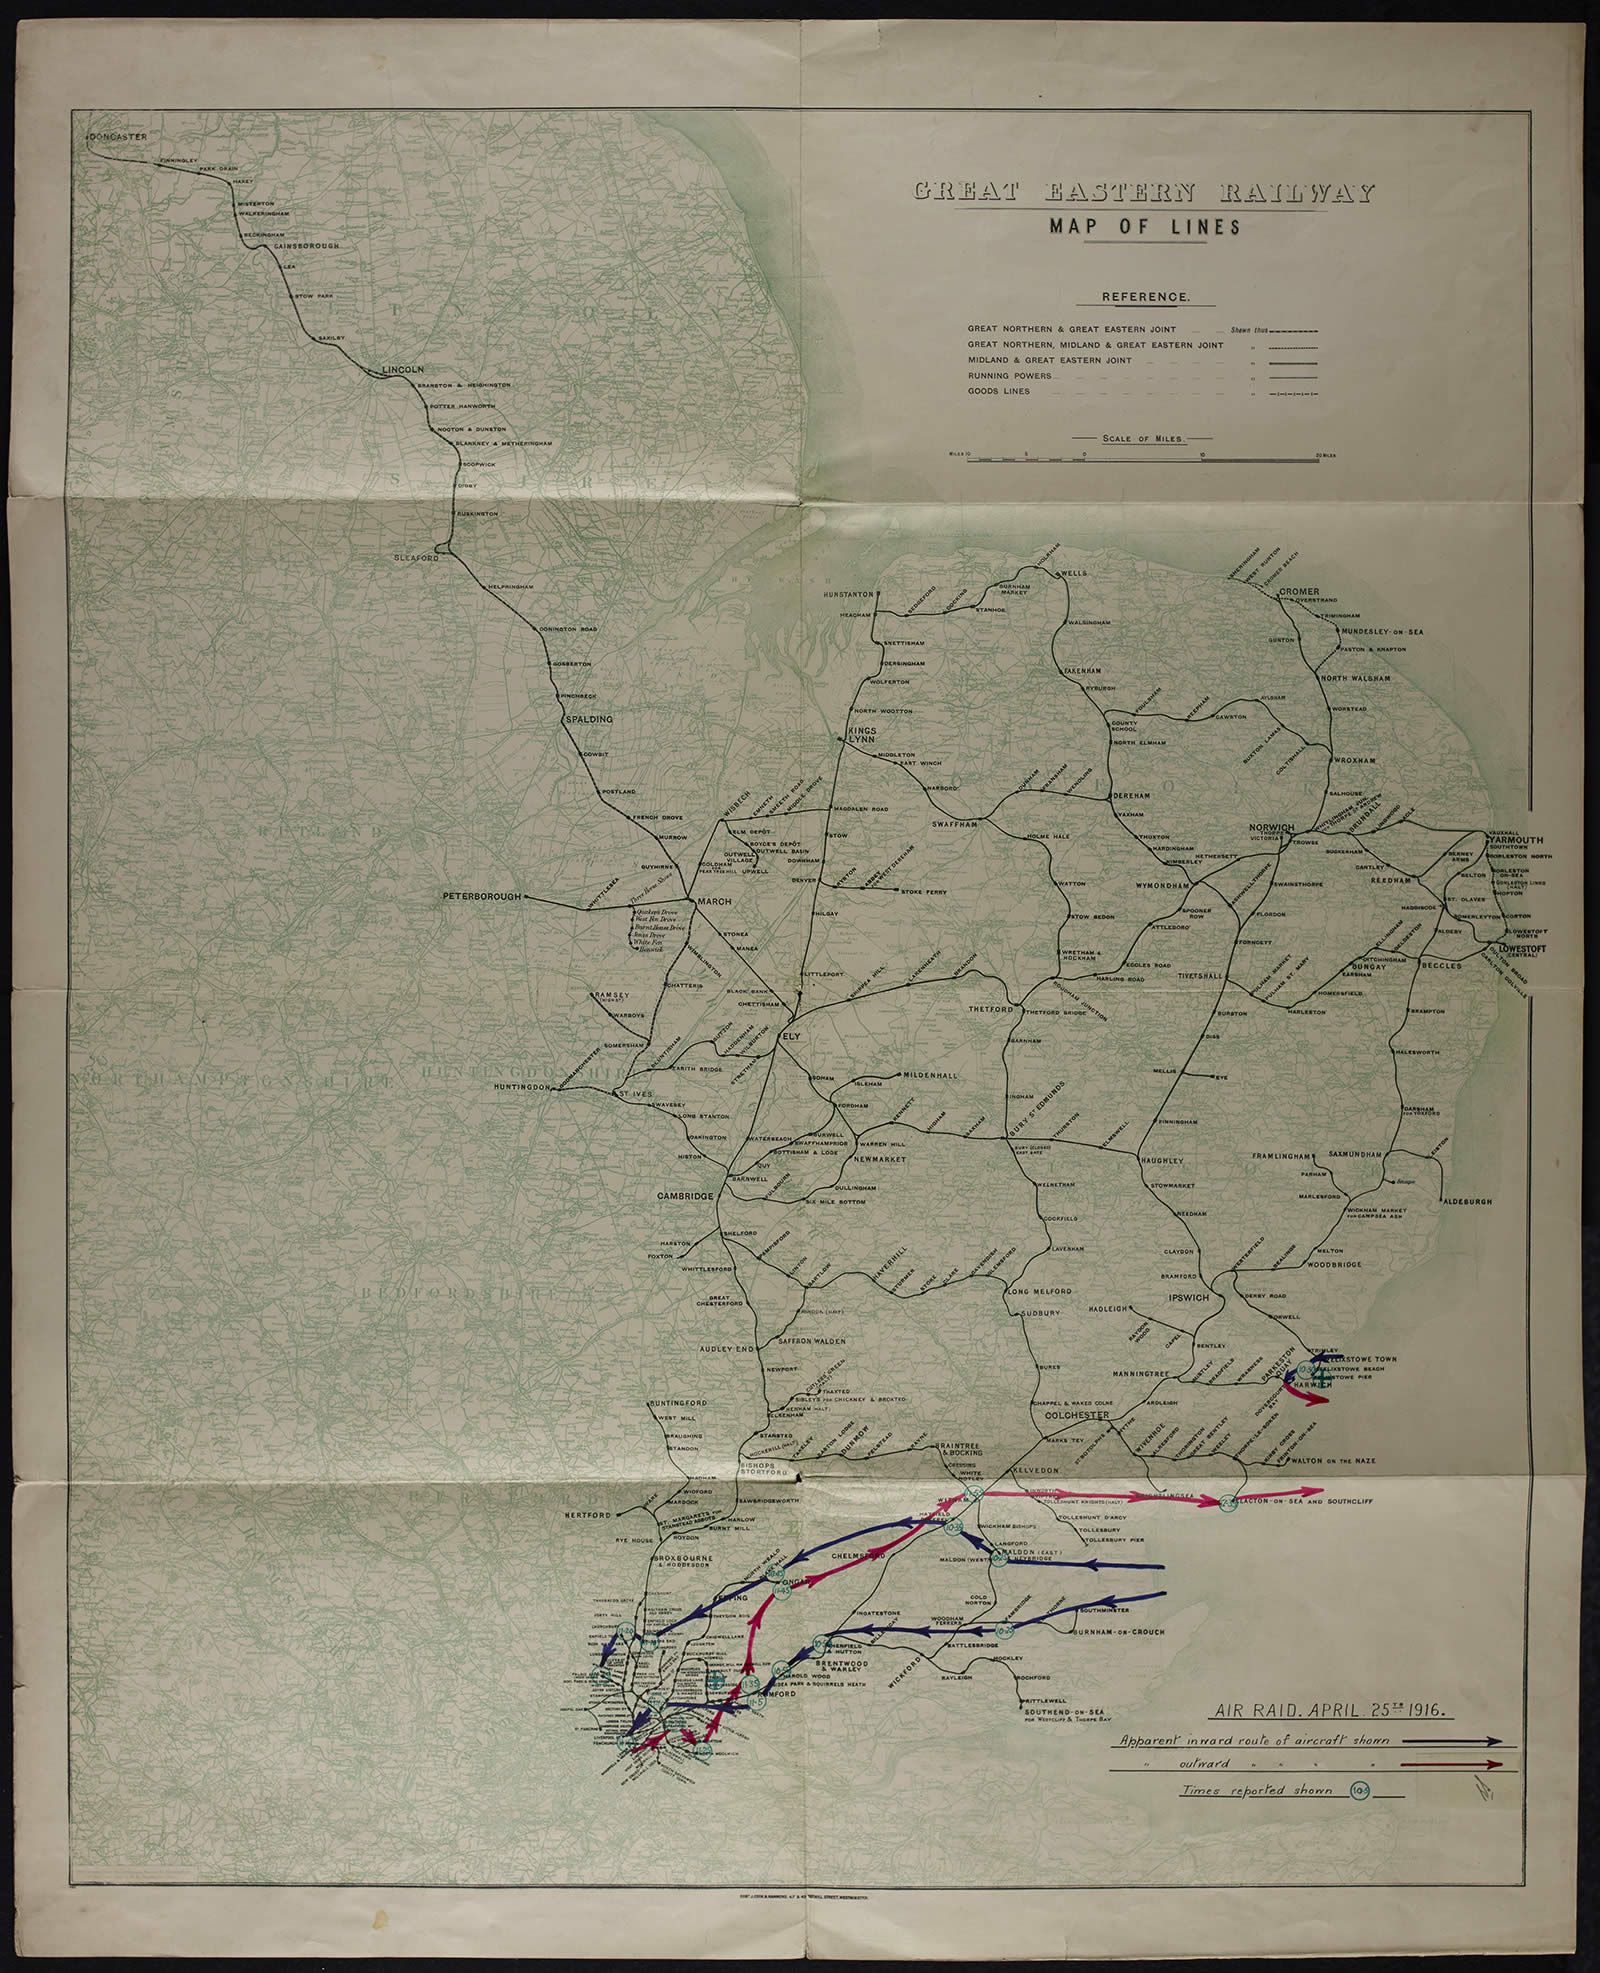 Image of a map of East Anglia, showing Great Eastern railway lines and the flight paths of enemy raiders on 25 April 1916